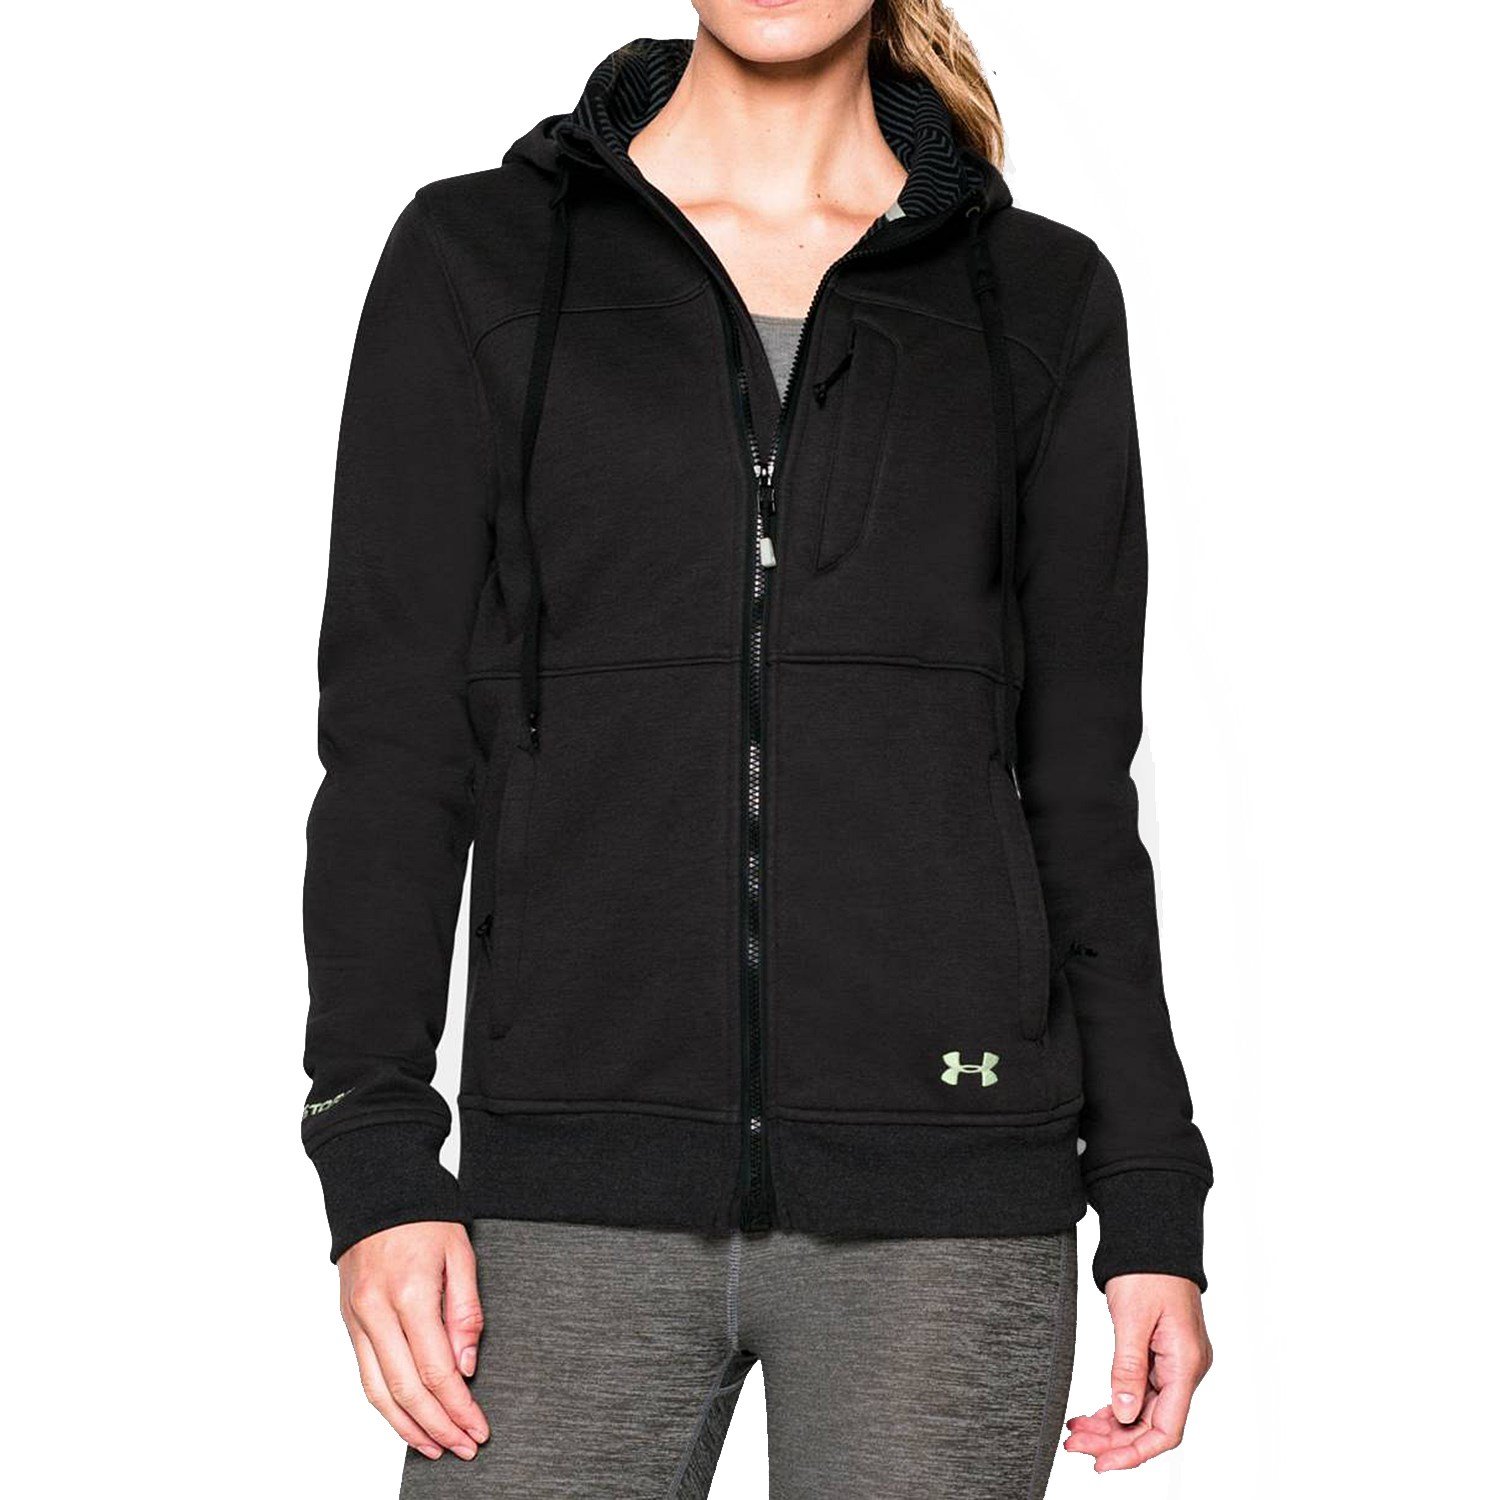 under armour storm coldgear infrared softershell jacket